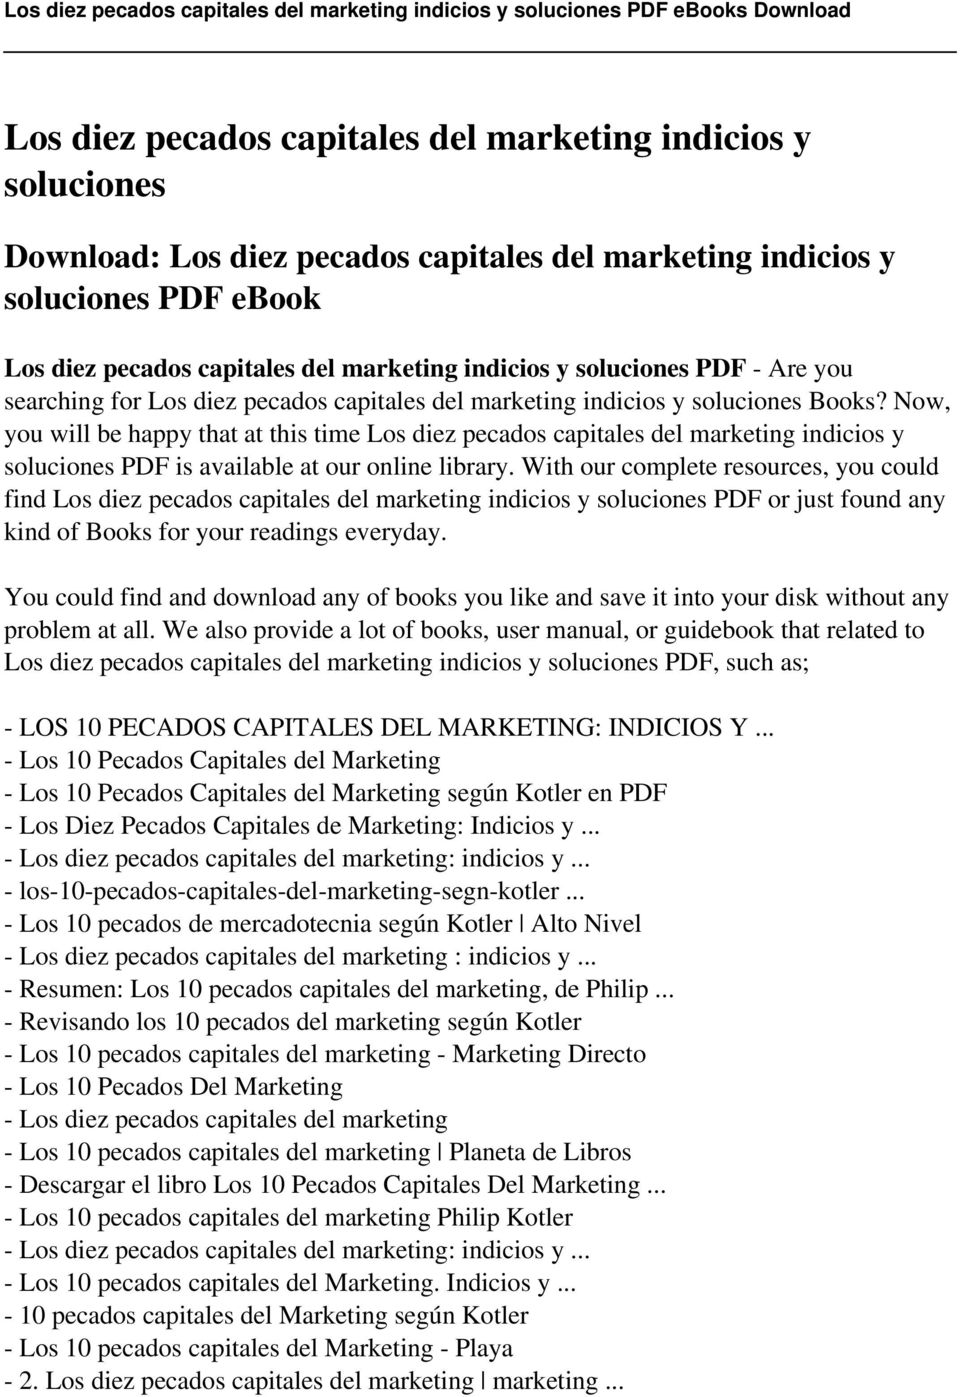 Now, you will be happy that at this time Los diez pecados capitales del marketing indicios y soluciones PDF is available at our online library.